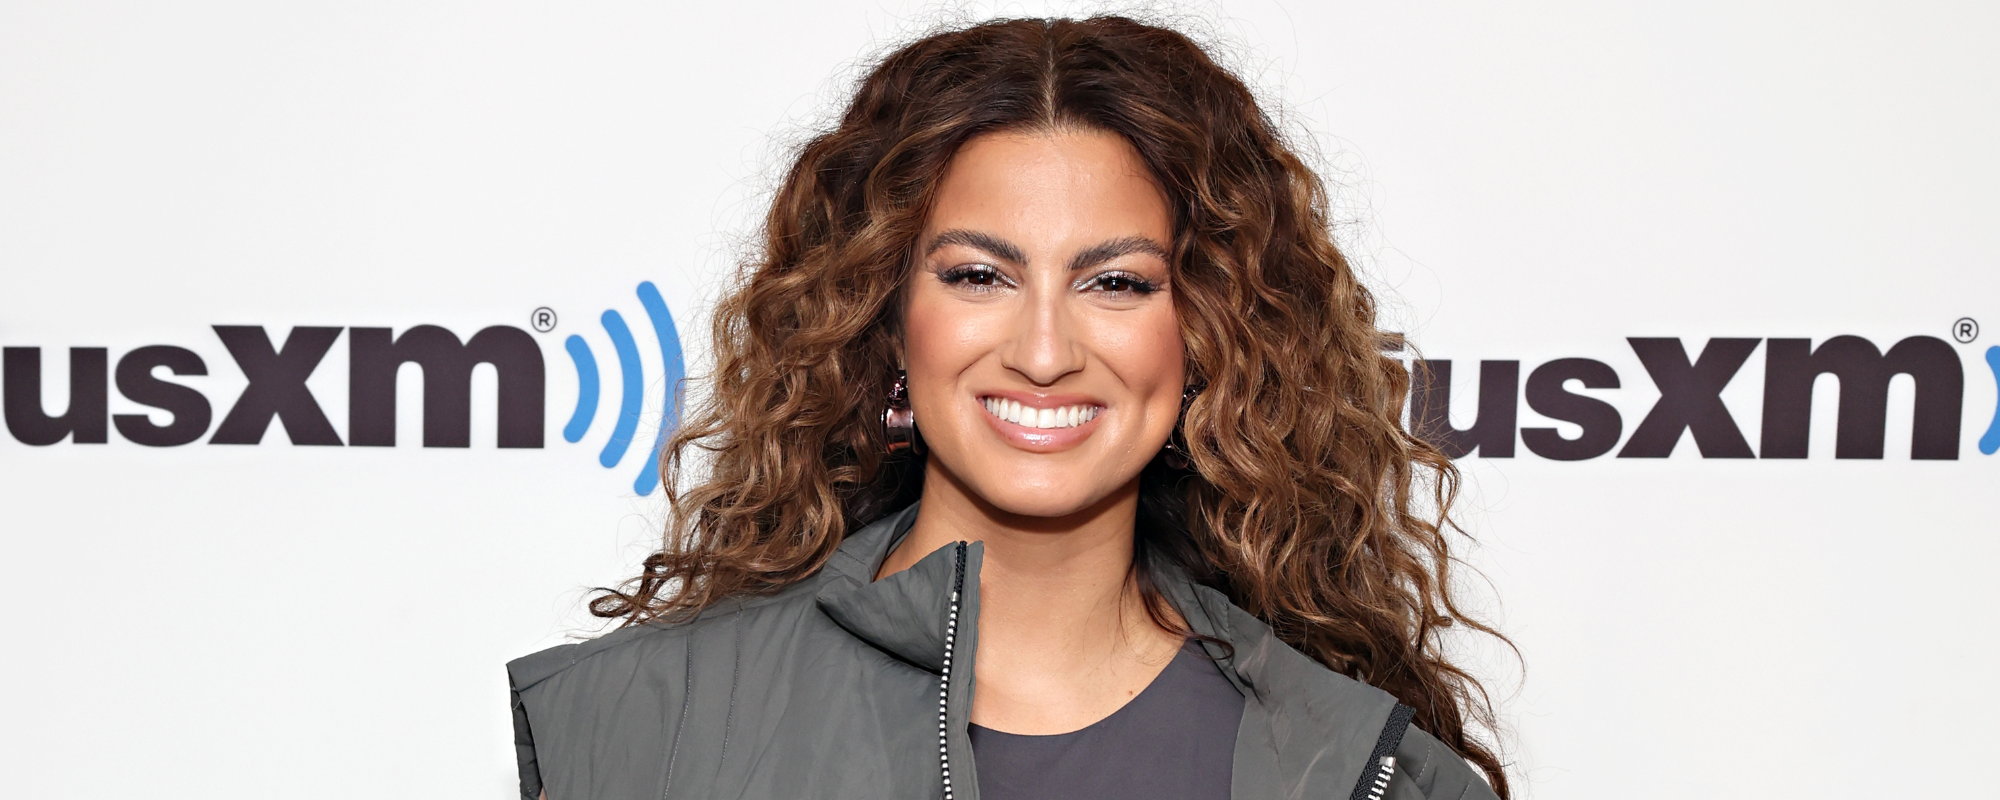 Tori Kelly Gives an Update on Her Health After Blood Clots: “It Seems Like it’s a Manageable Thing Now”